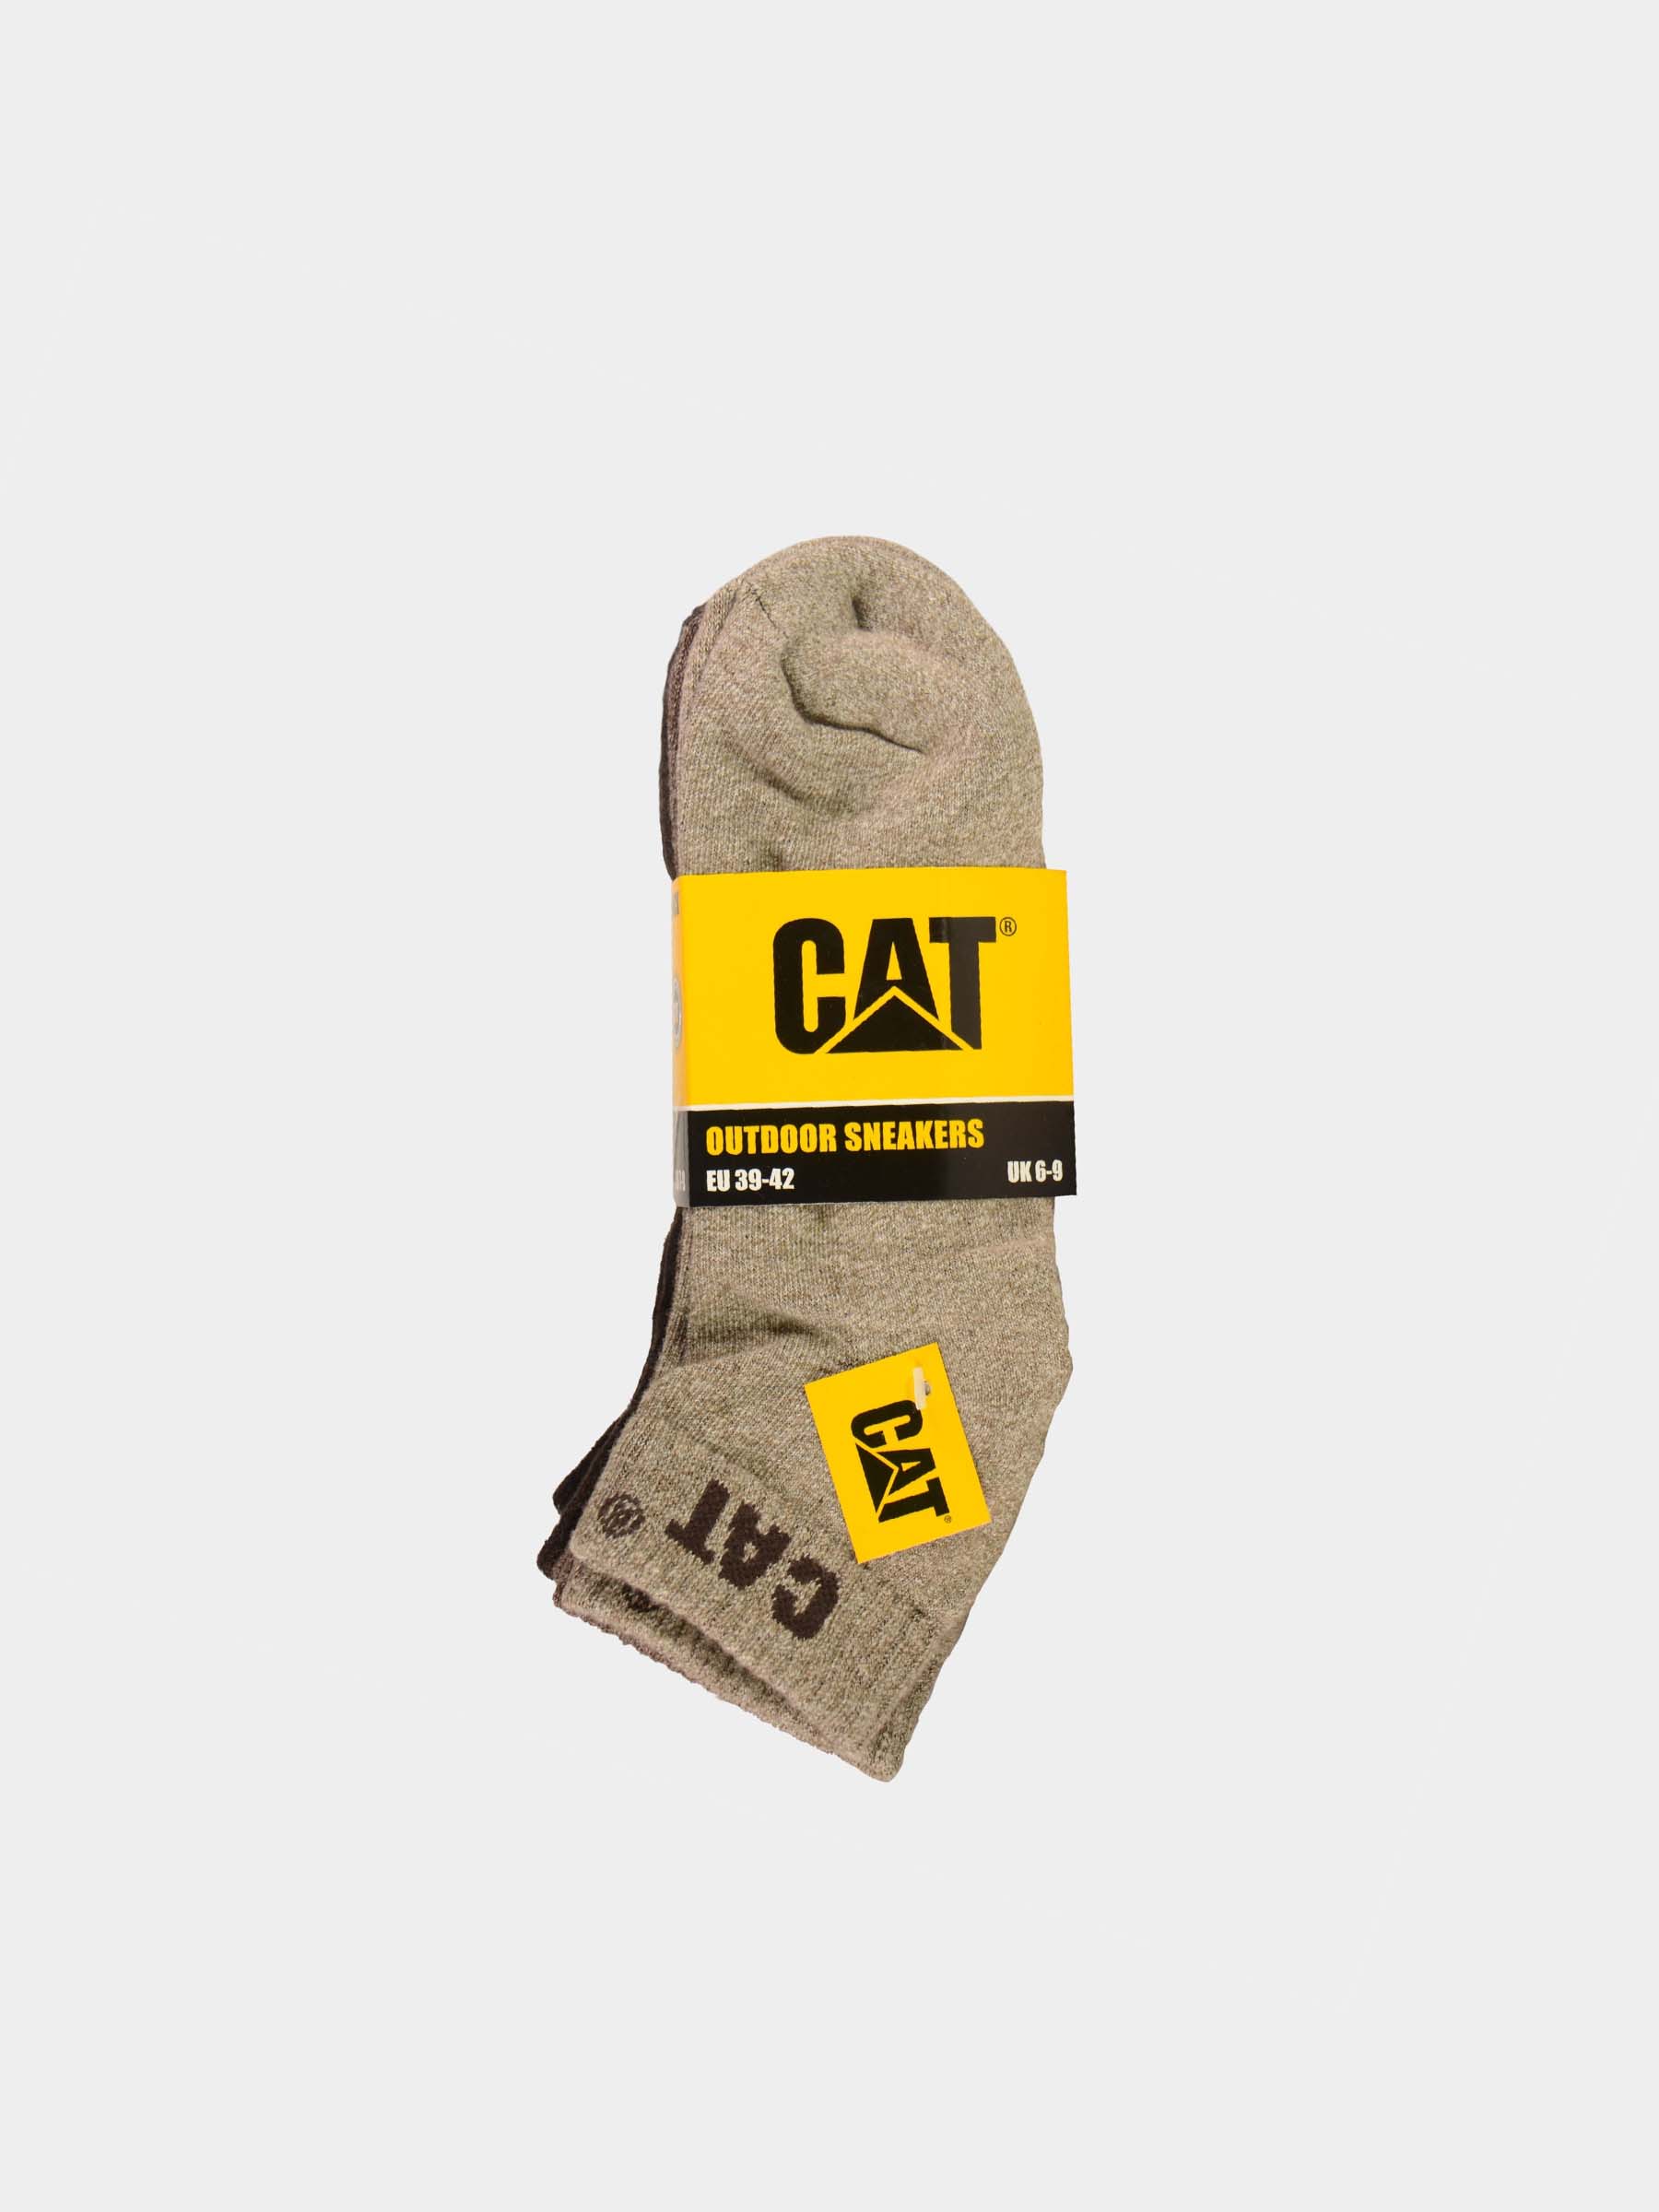 Caterpillar Outdoor Sneakers Ankle Socks (3 Pack) #color_Multi